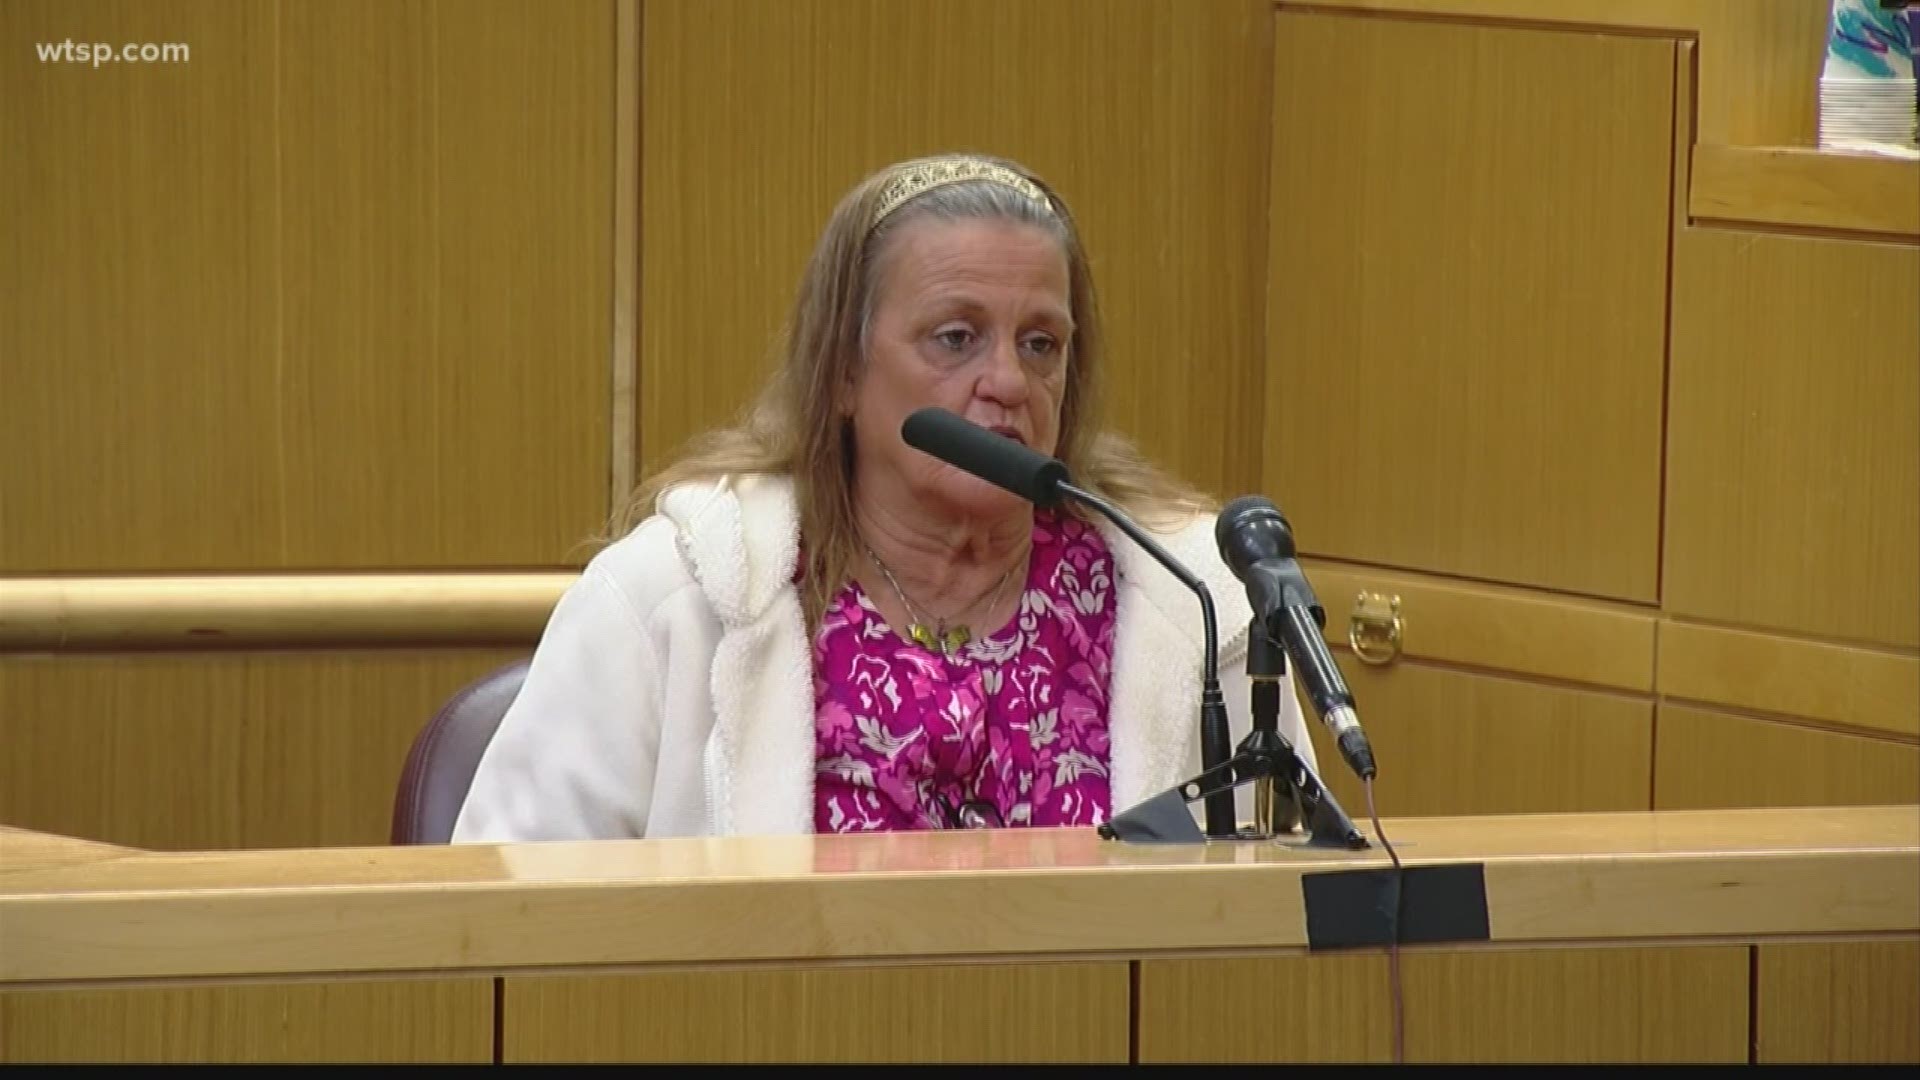 For the second time in one week, the jury heard from Jonchuck’s mother, Michele, but this time, the defense put her on the stand.

Michele Jonchuck detailed her son’s bizarre behavior just two hours before he killed Phoebe.